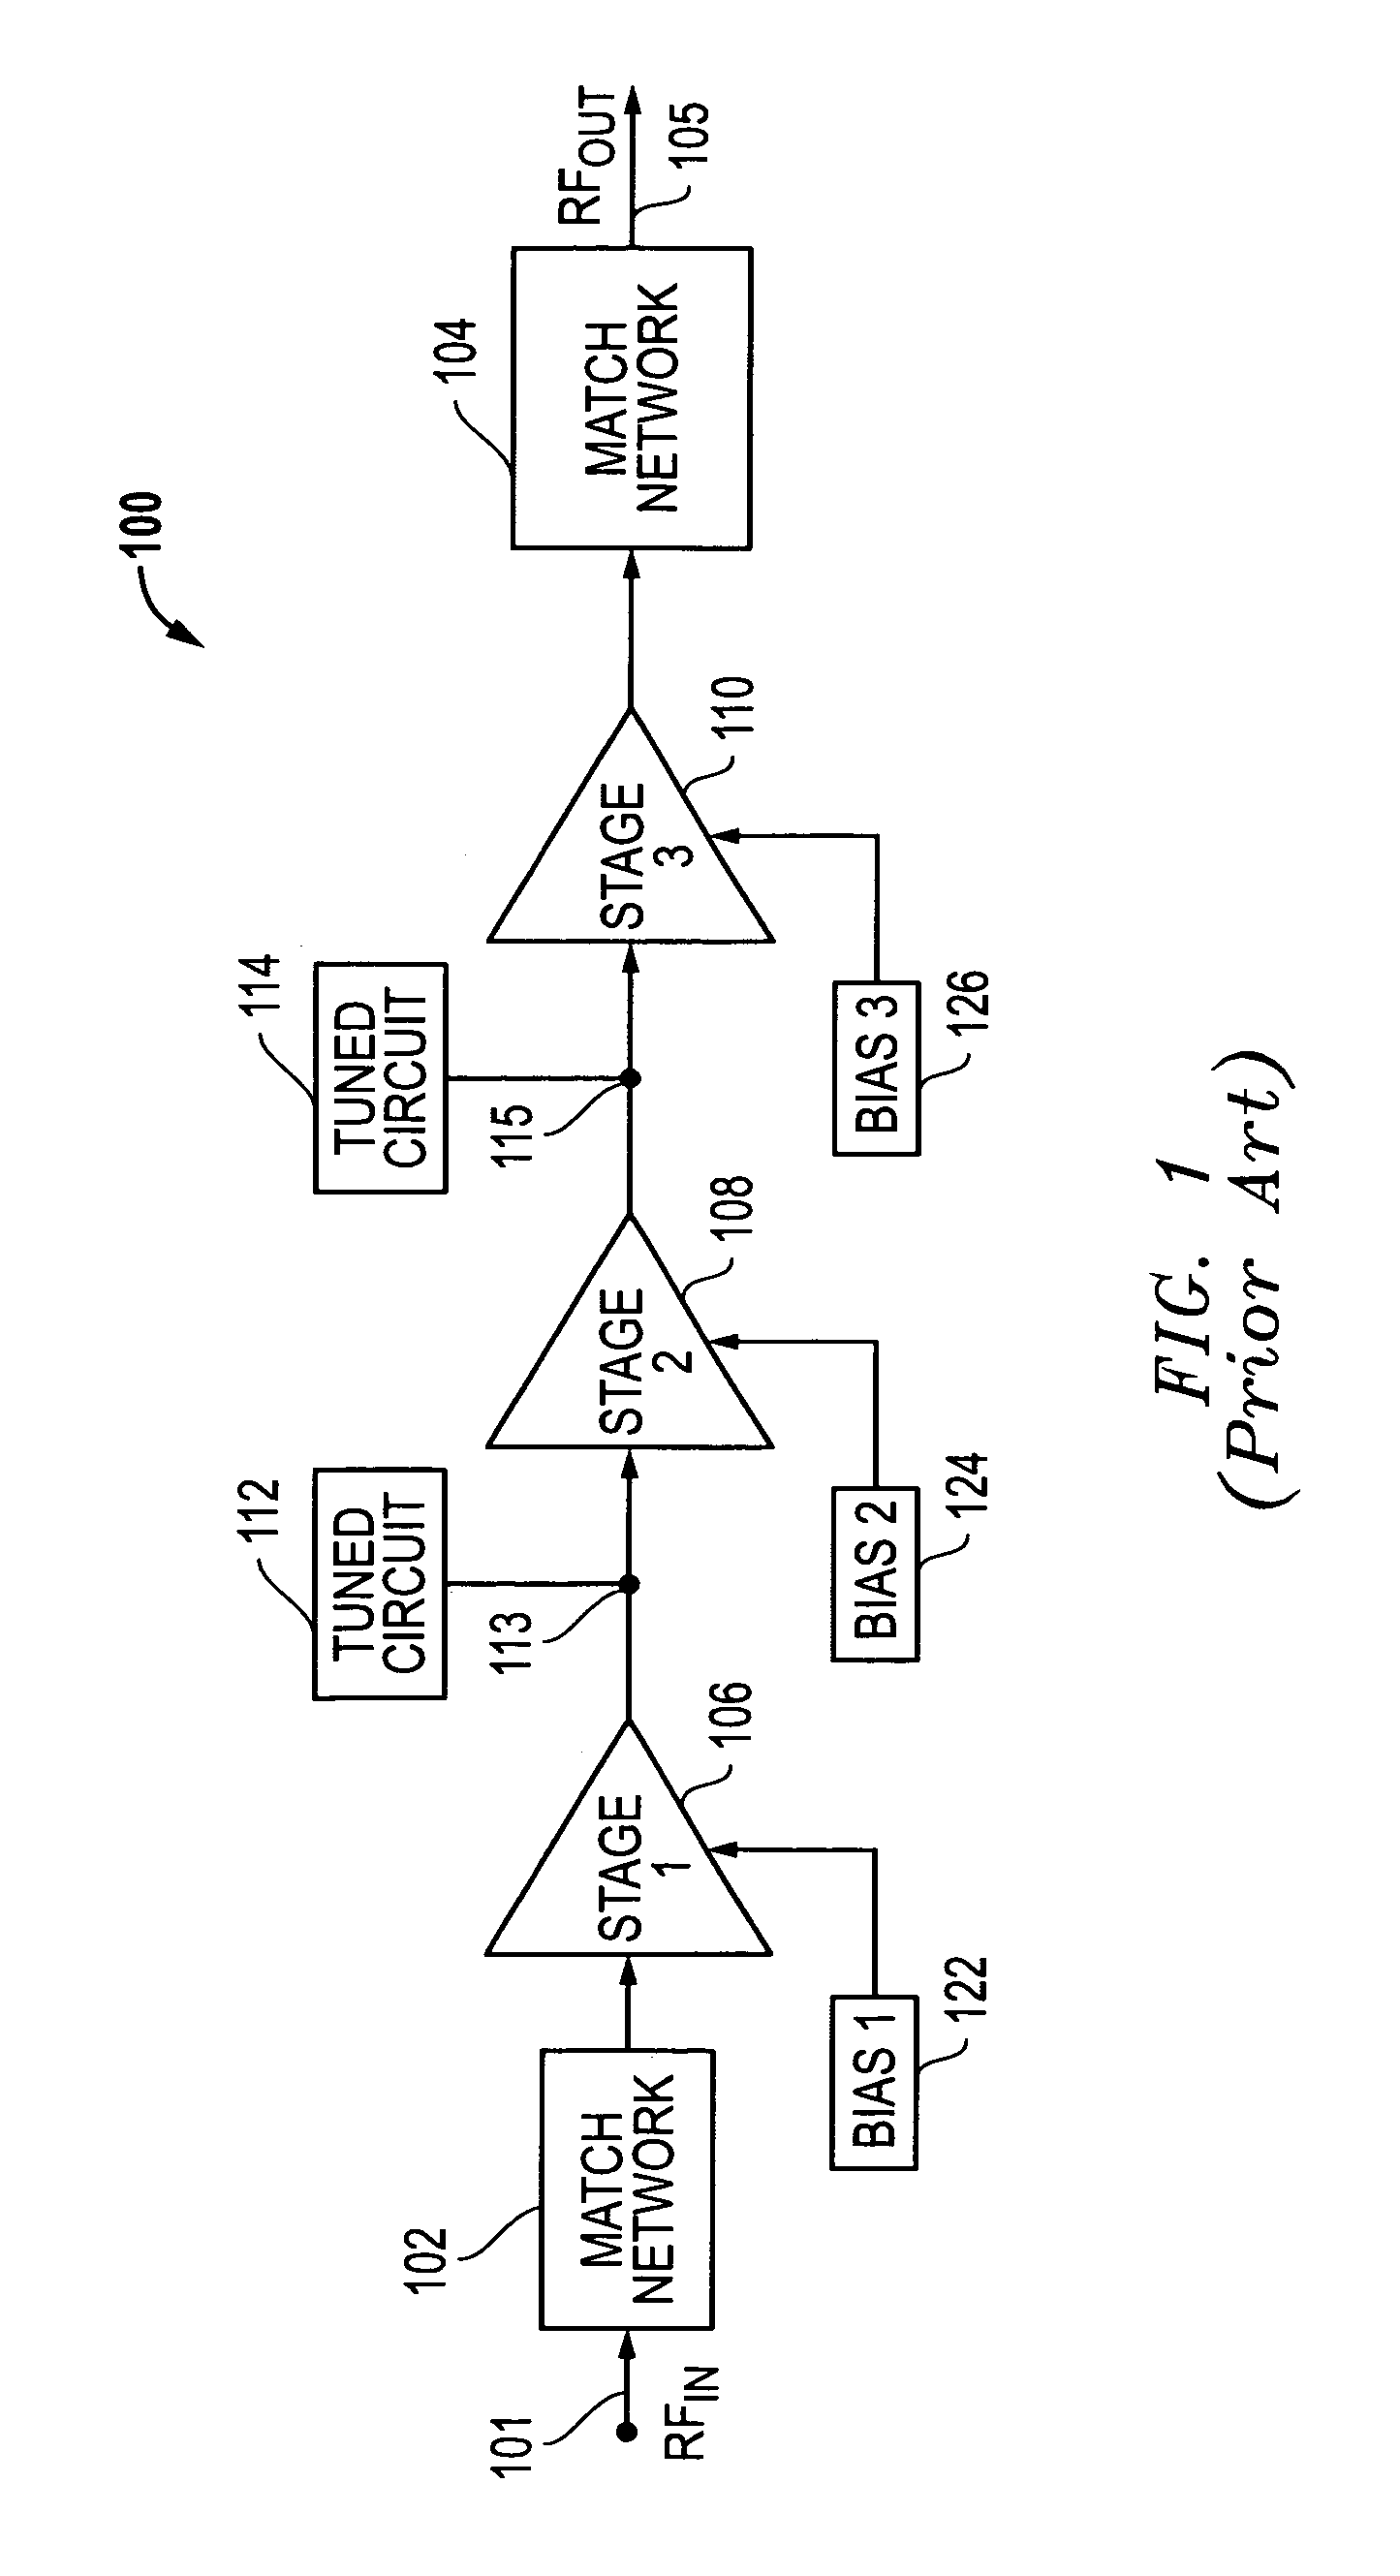 CMOS power amplifiers having integrated one-time programmable (OTP) memories